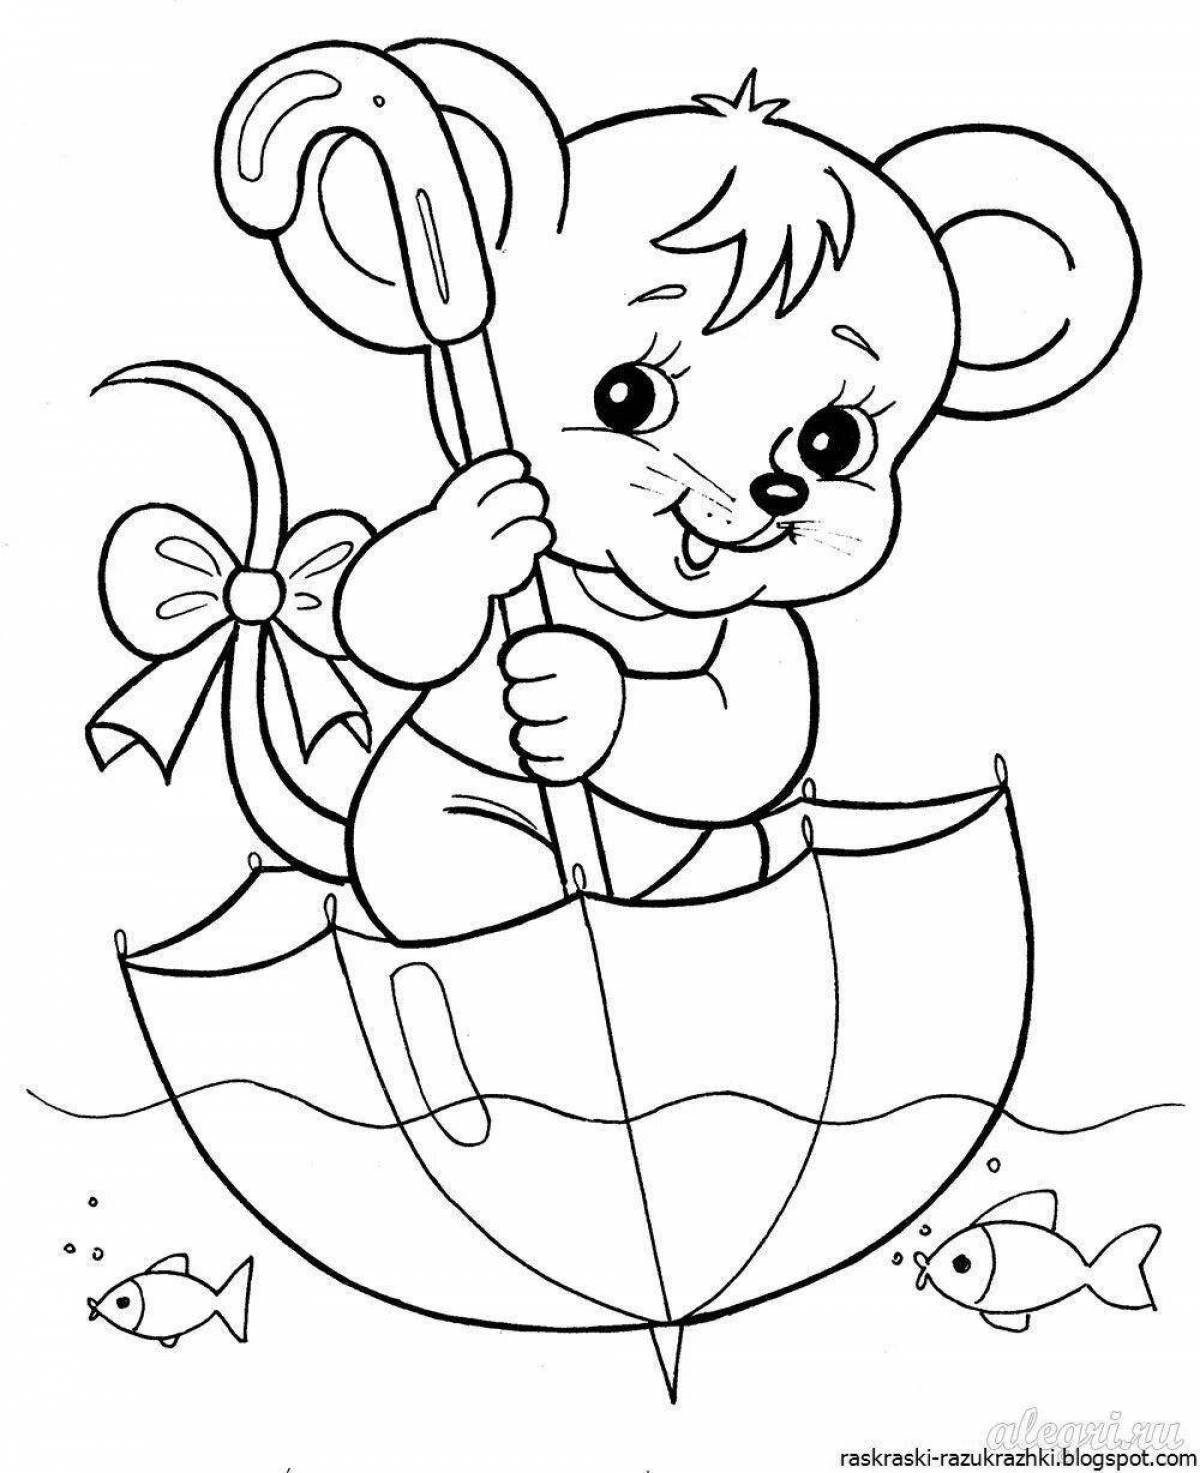 Live coloring for children 3-4 years old